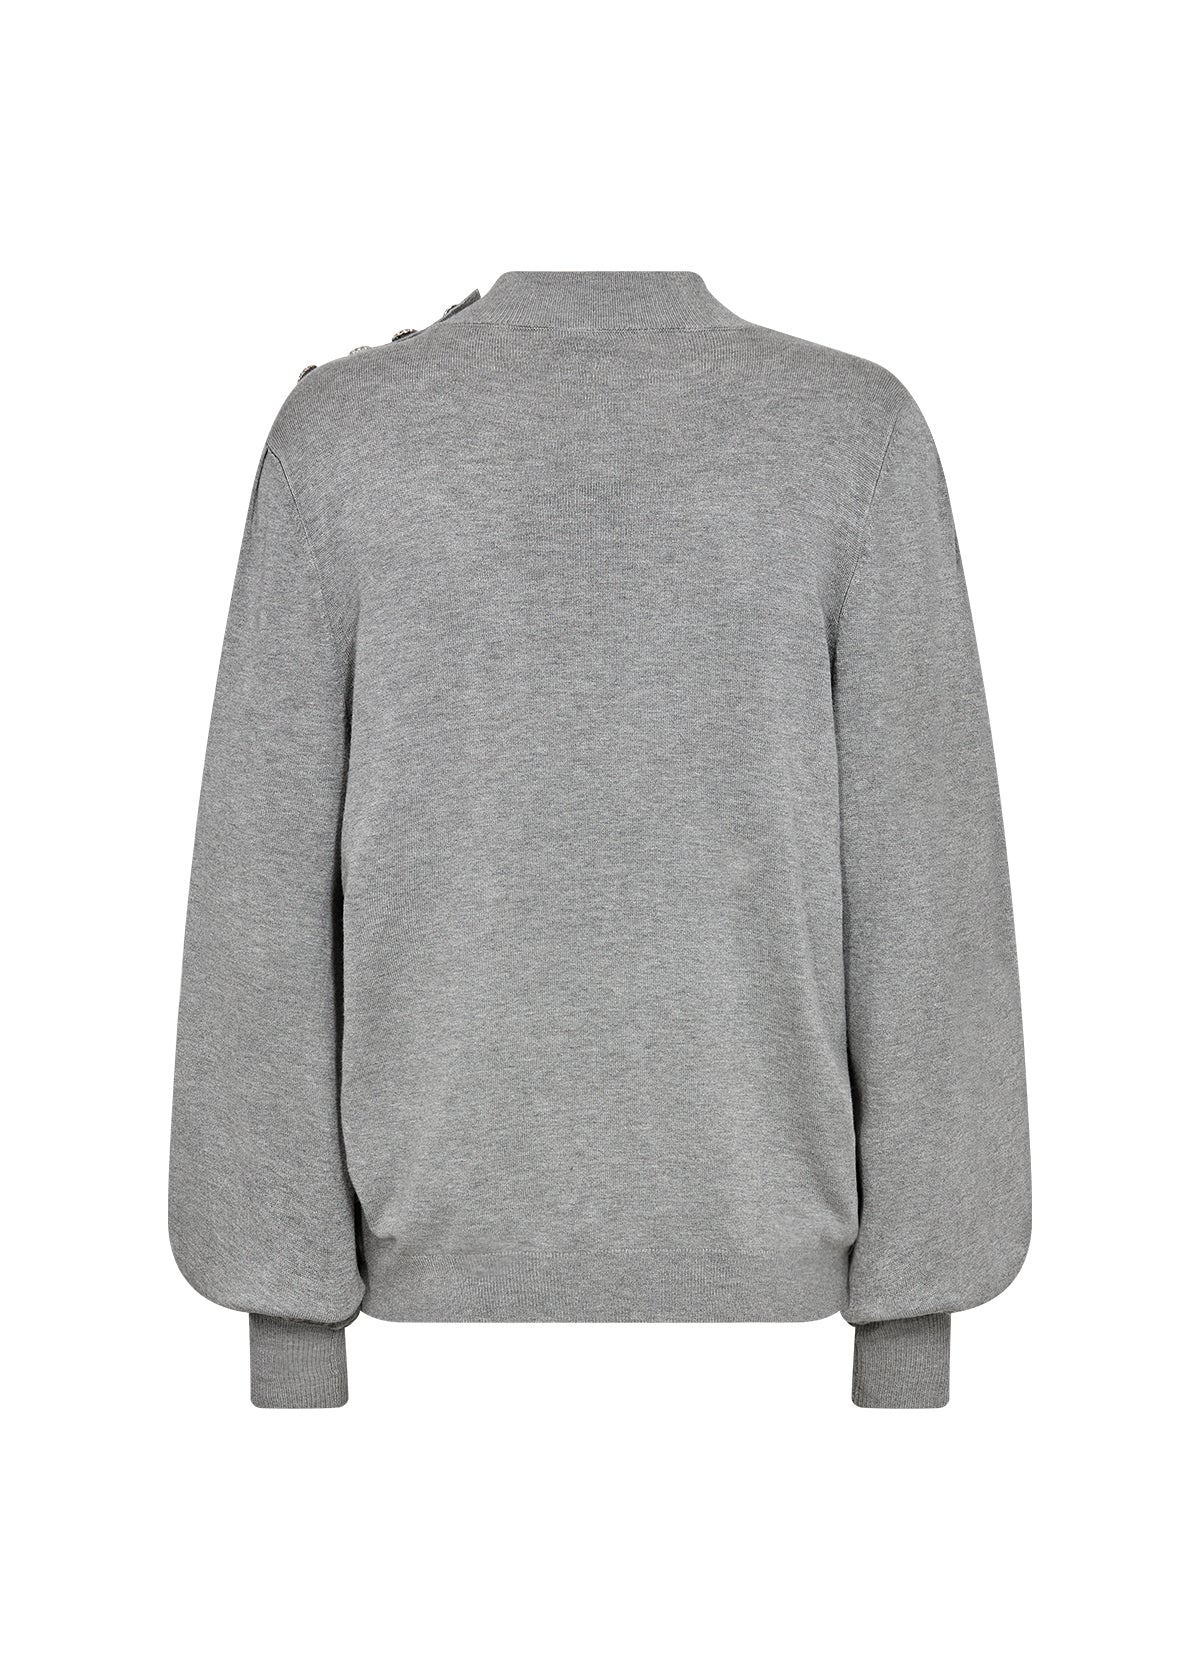 The Darcy Sweater in Grey